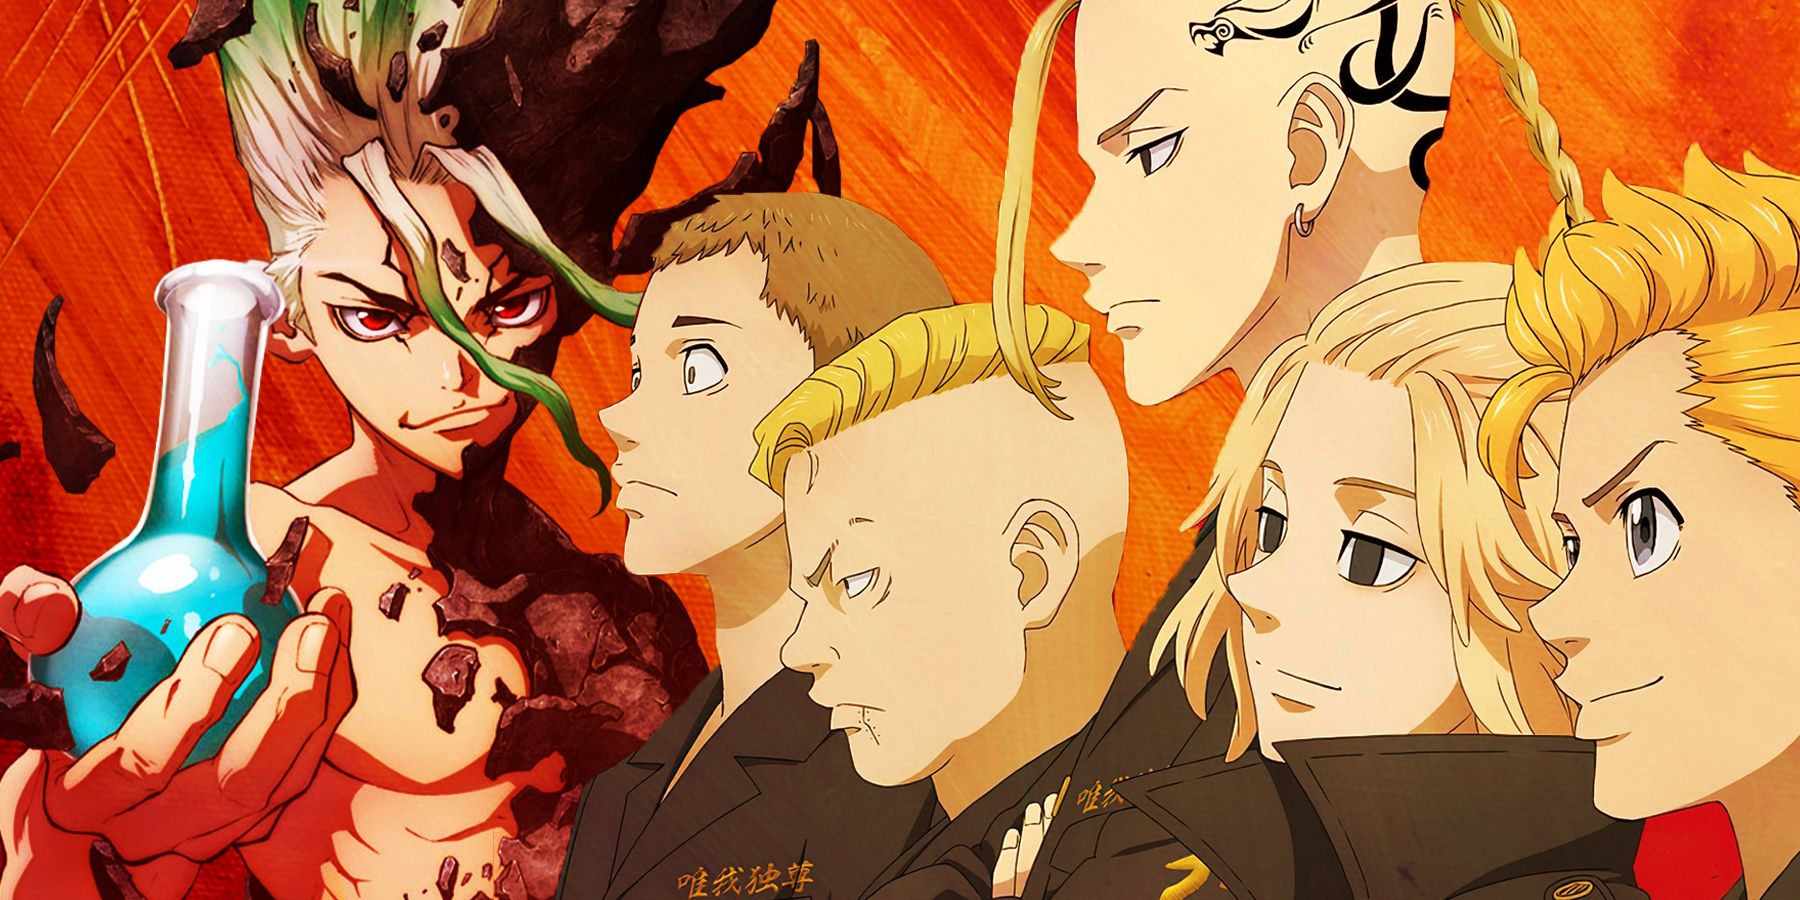 HBO Max adds four more anime films and two Ghibli documentaries to its  library  TechRadar